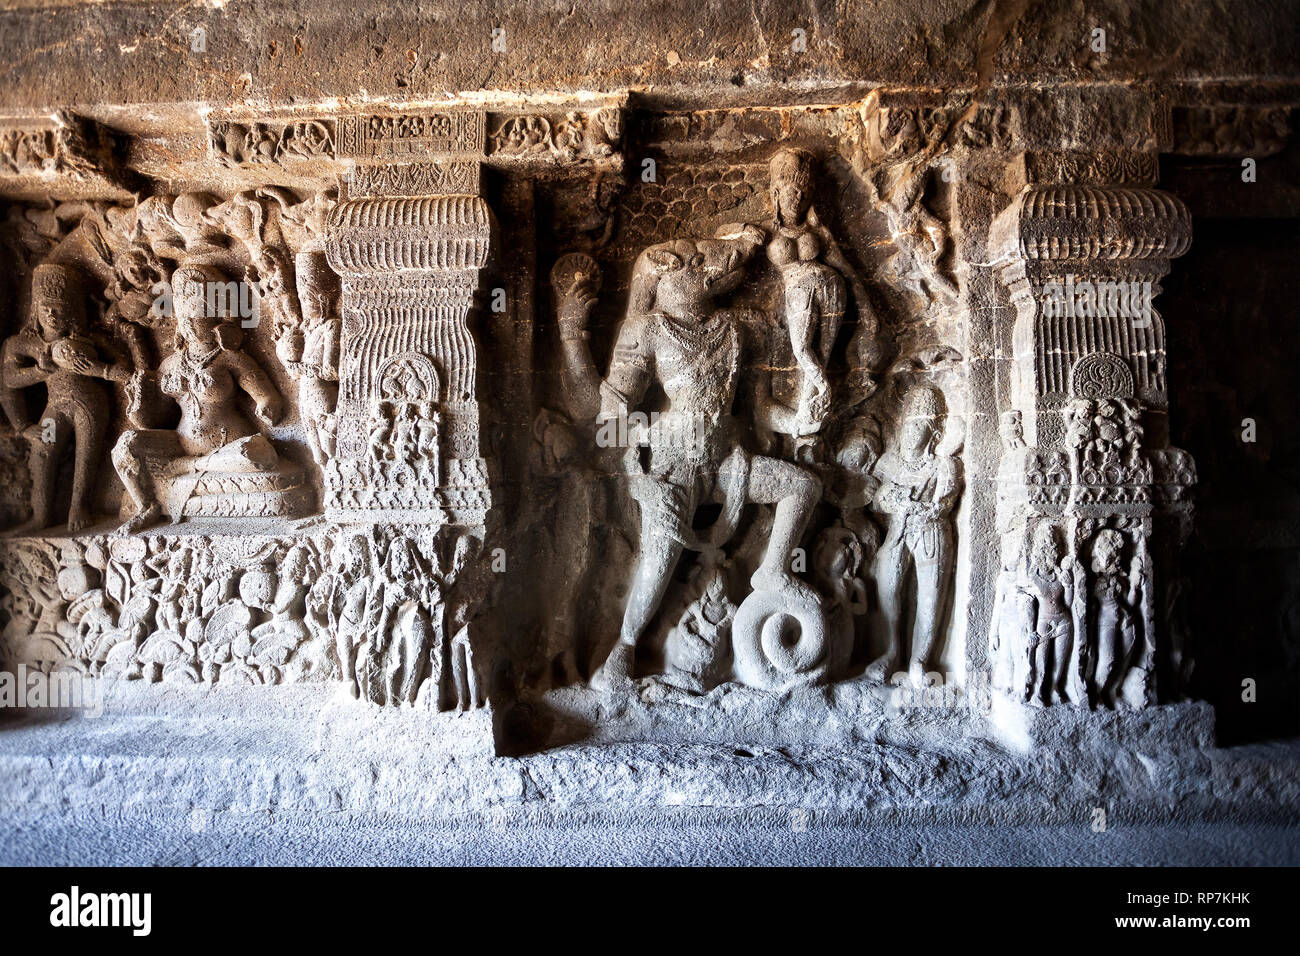 Carved statues of pig and goddess at ancient besrelief in Ellora cave near Aurangabad, Maharashtra, India Stock Photo